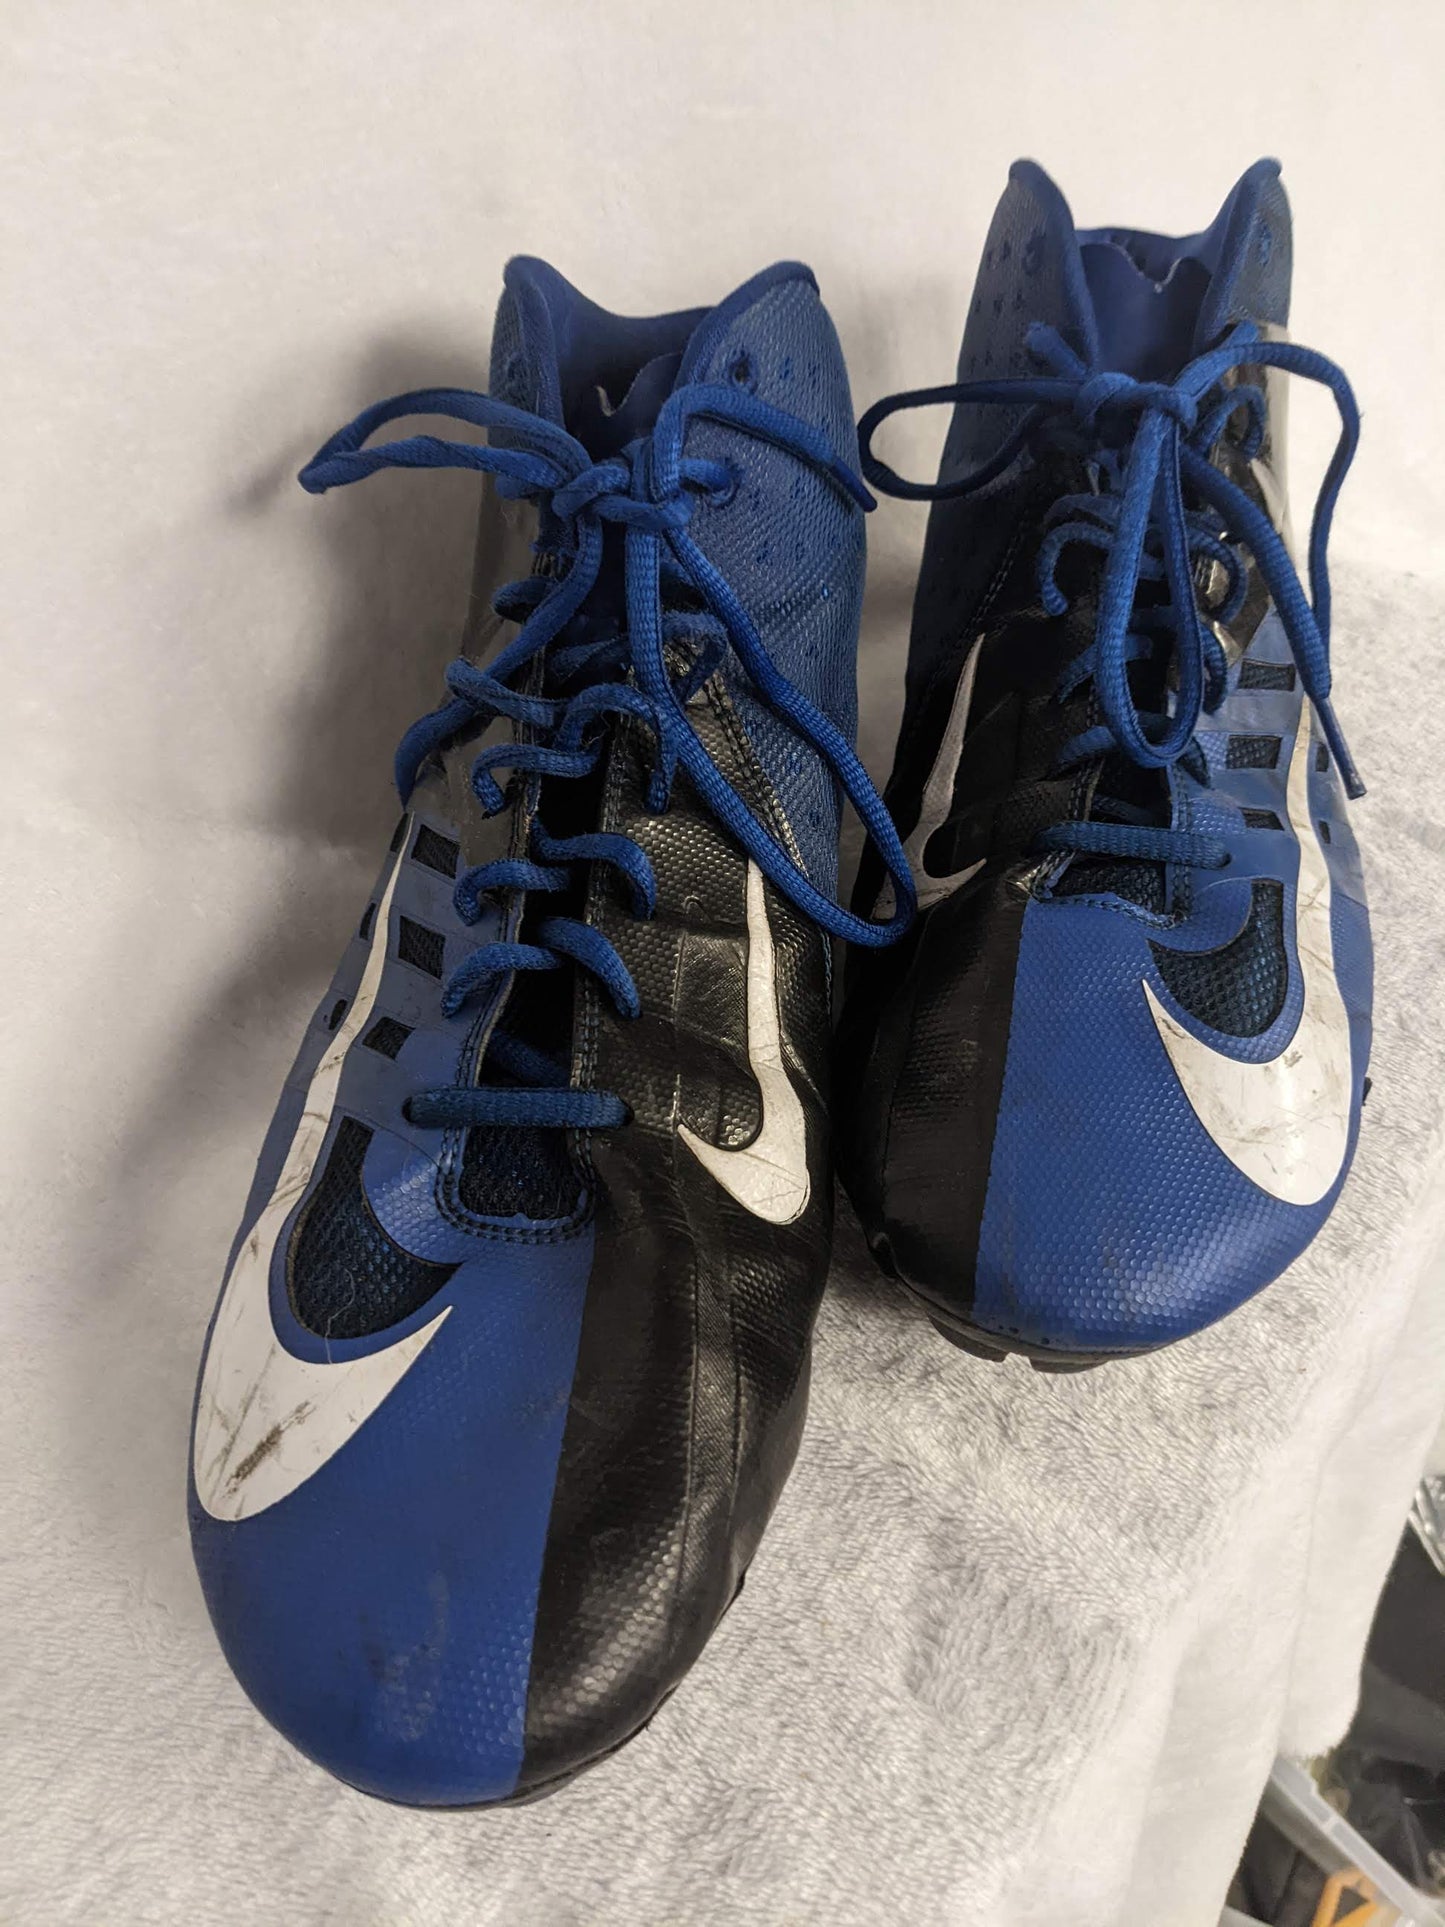 Nike Vapor Pro Cleats Size 13 Color Blue Condition Used